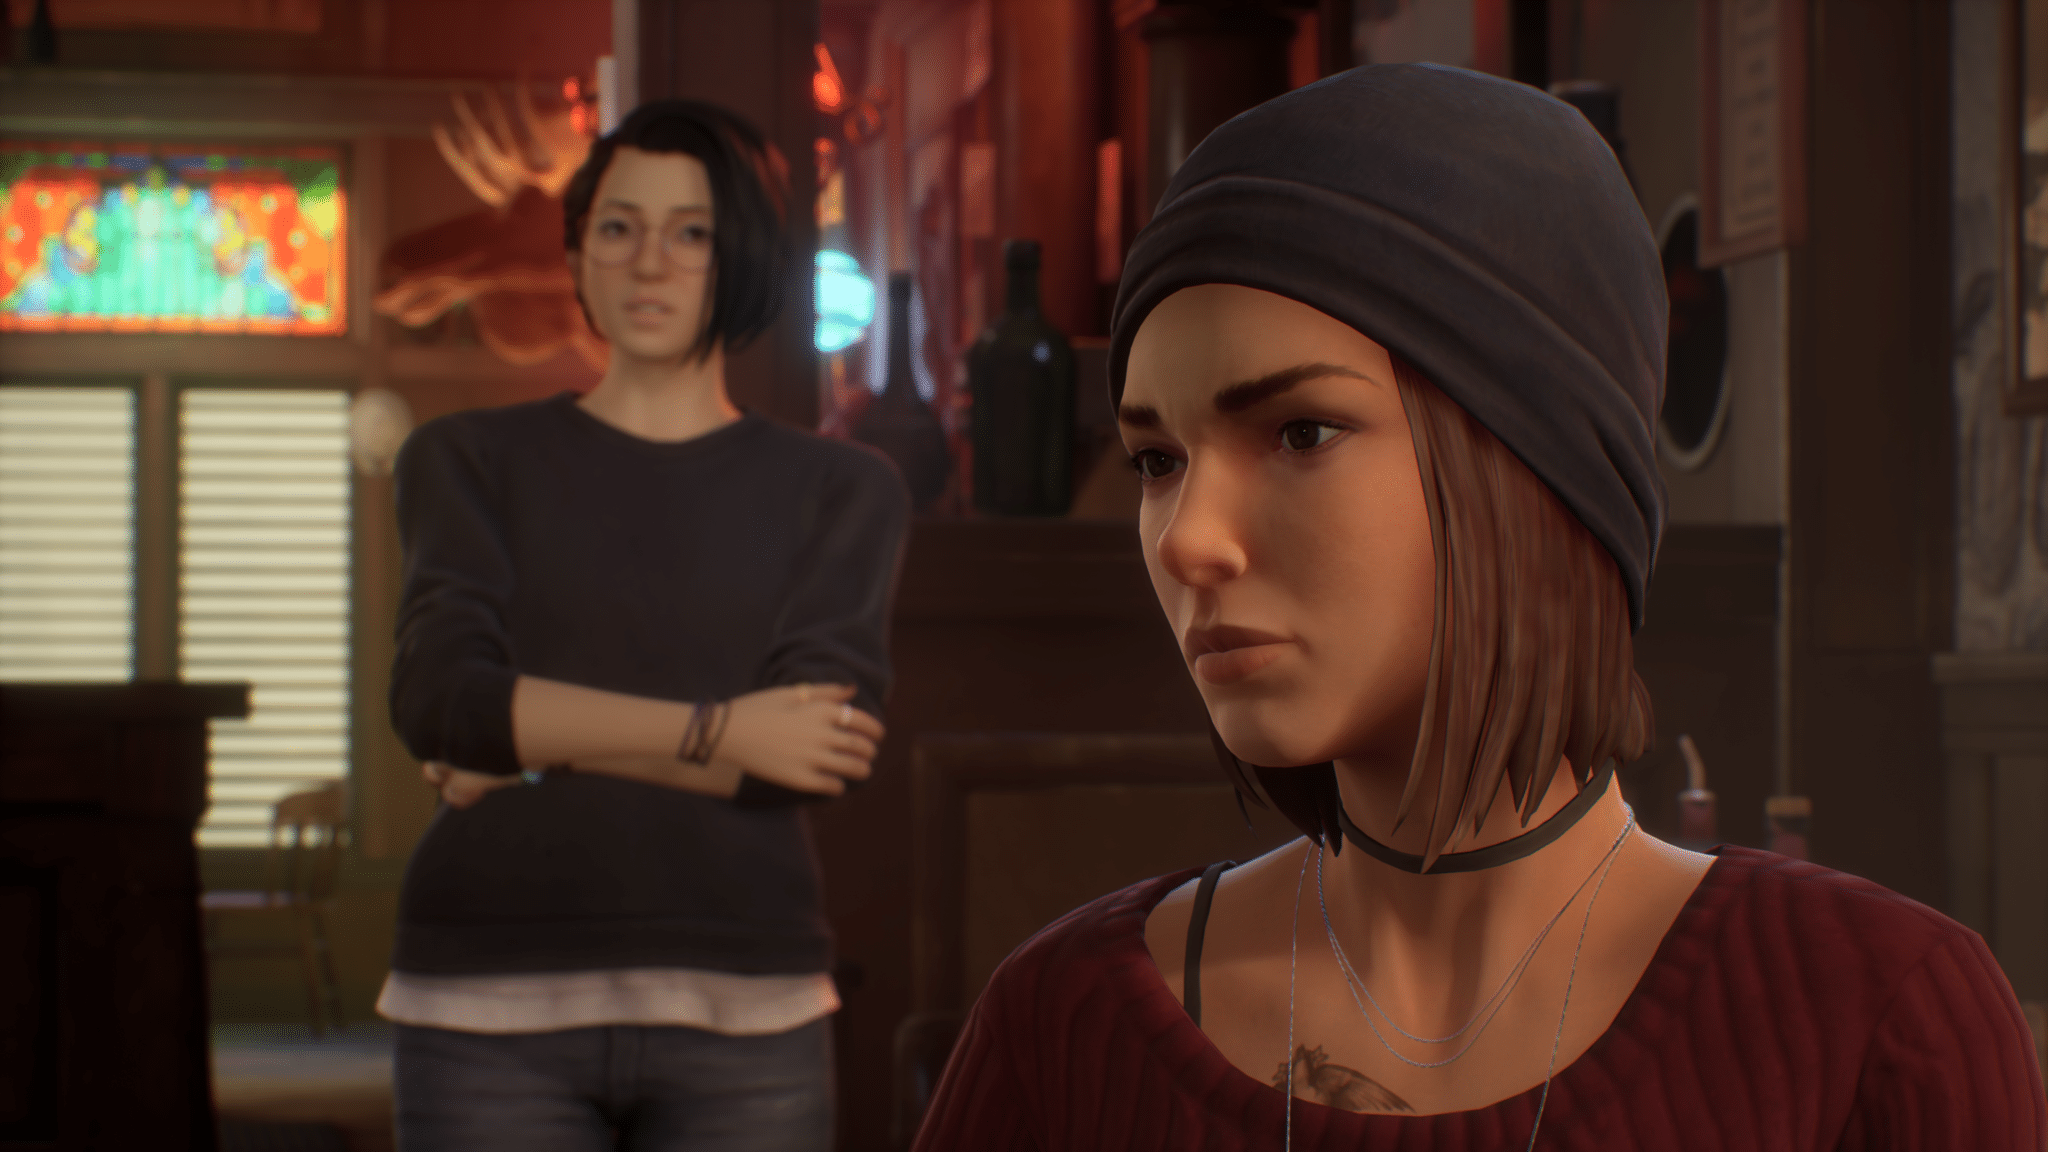 Life is Strange: True Colors gameplay shows love interests of bisexual lead